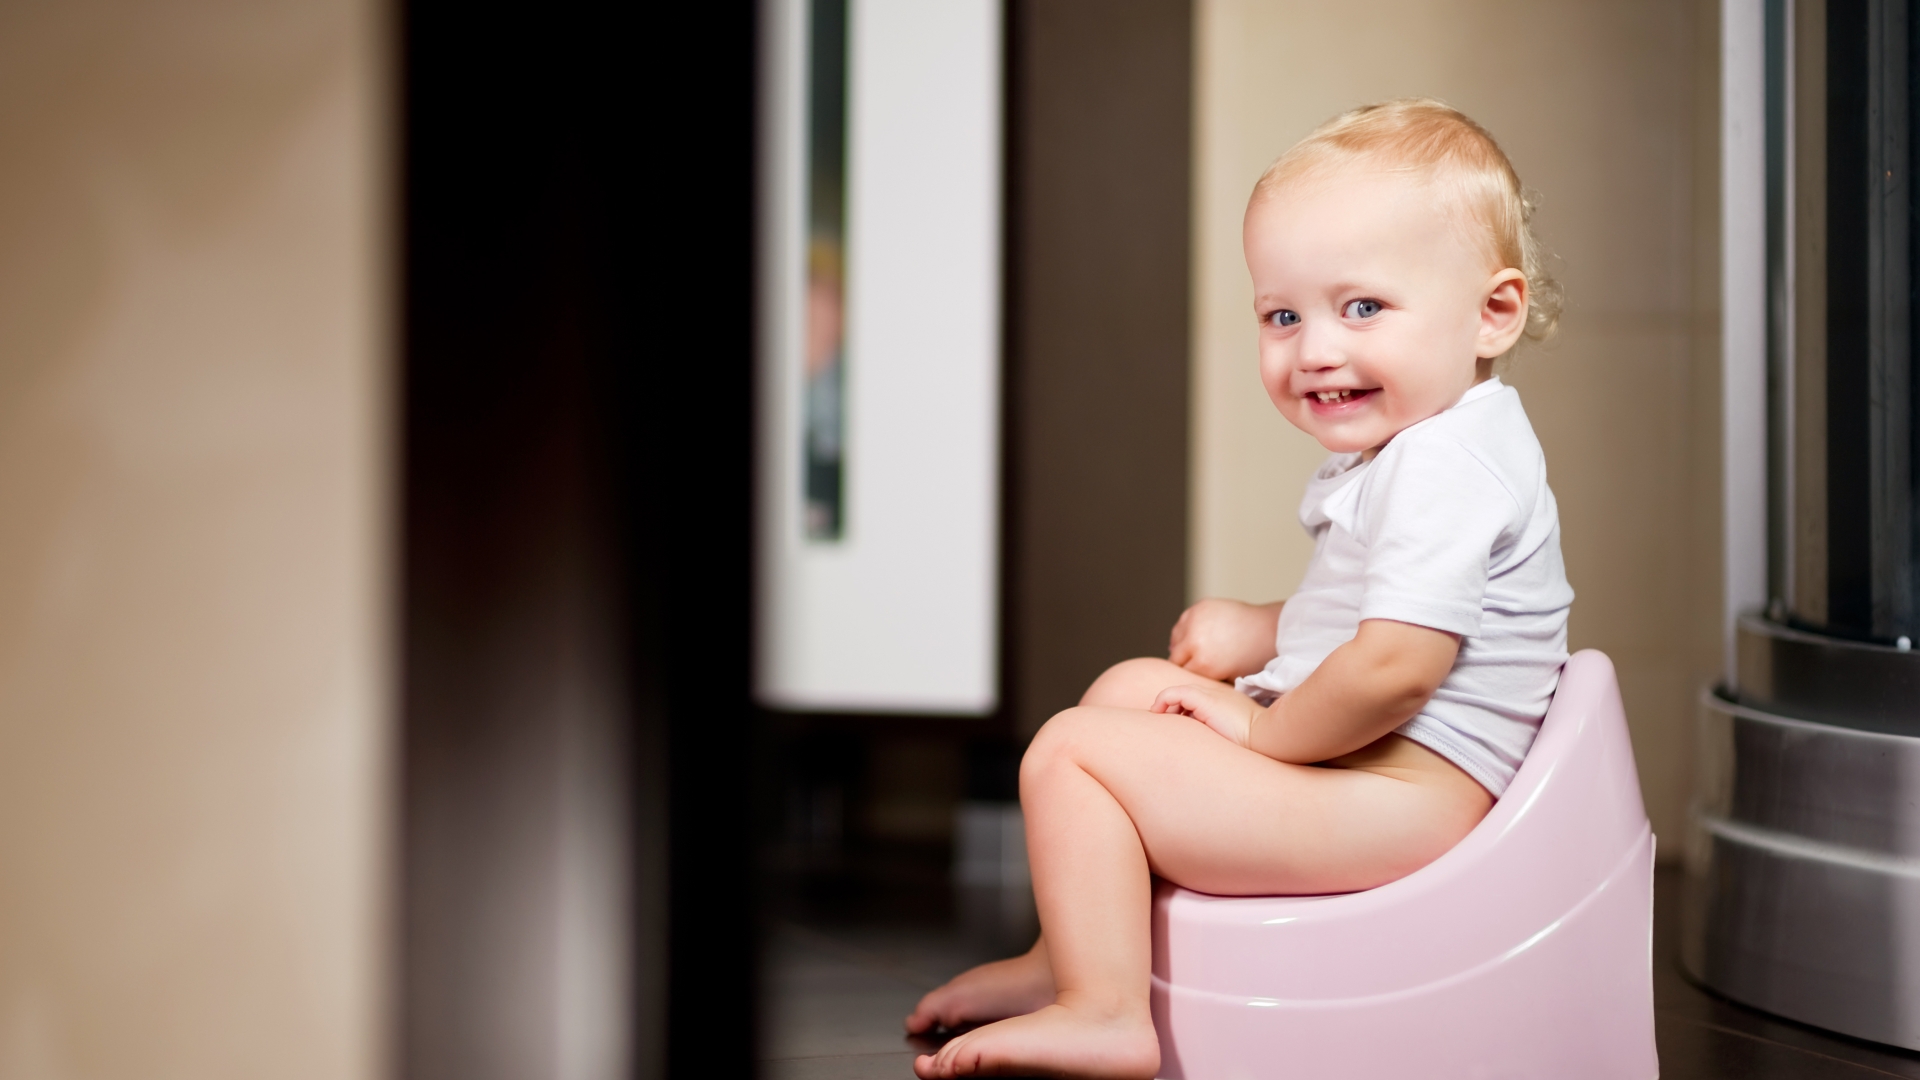 I’m a mum-of-two and there’s five tips I swear by to help potty train a stubborn toddler – they work every time